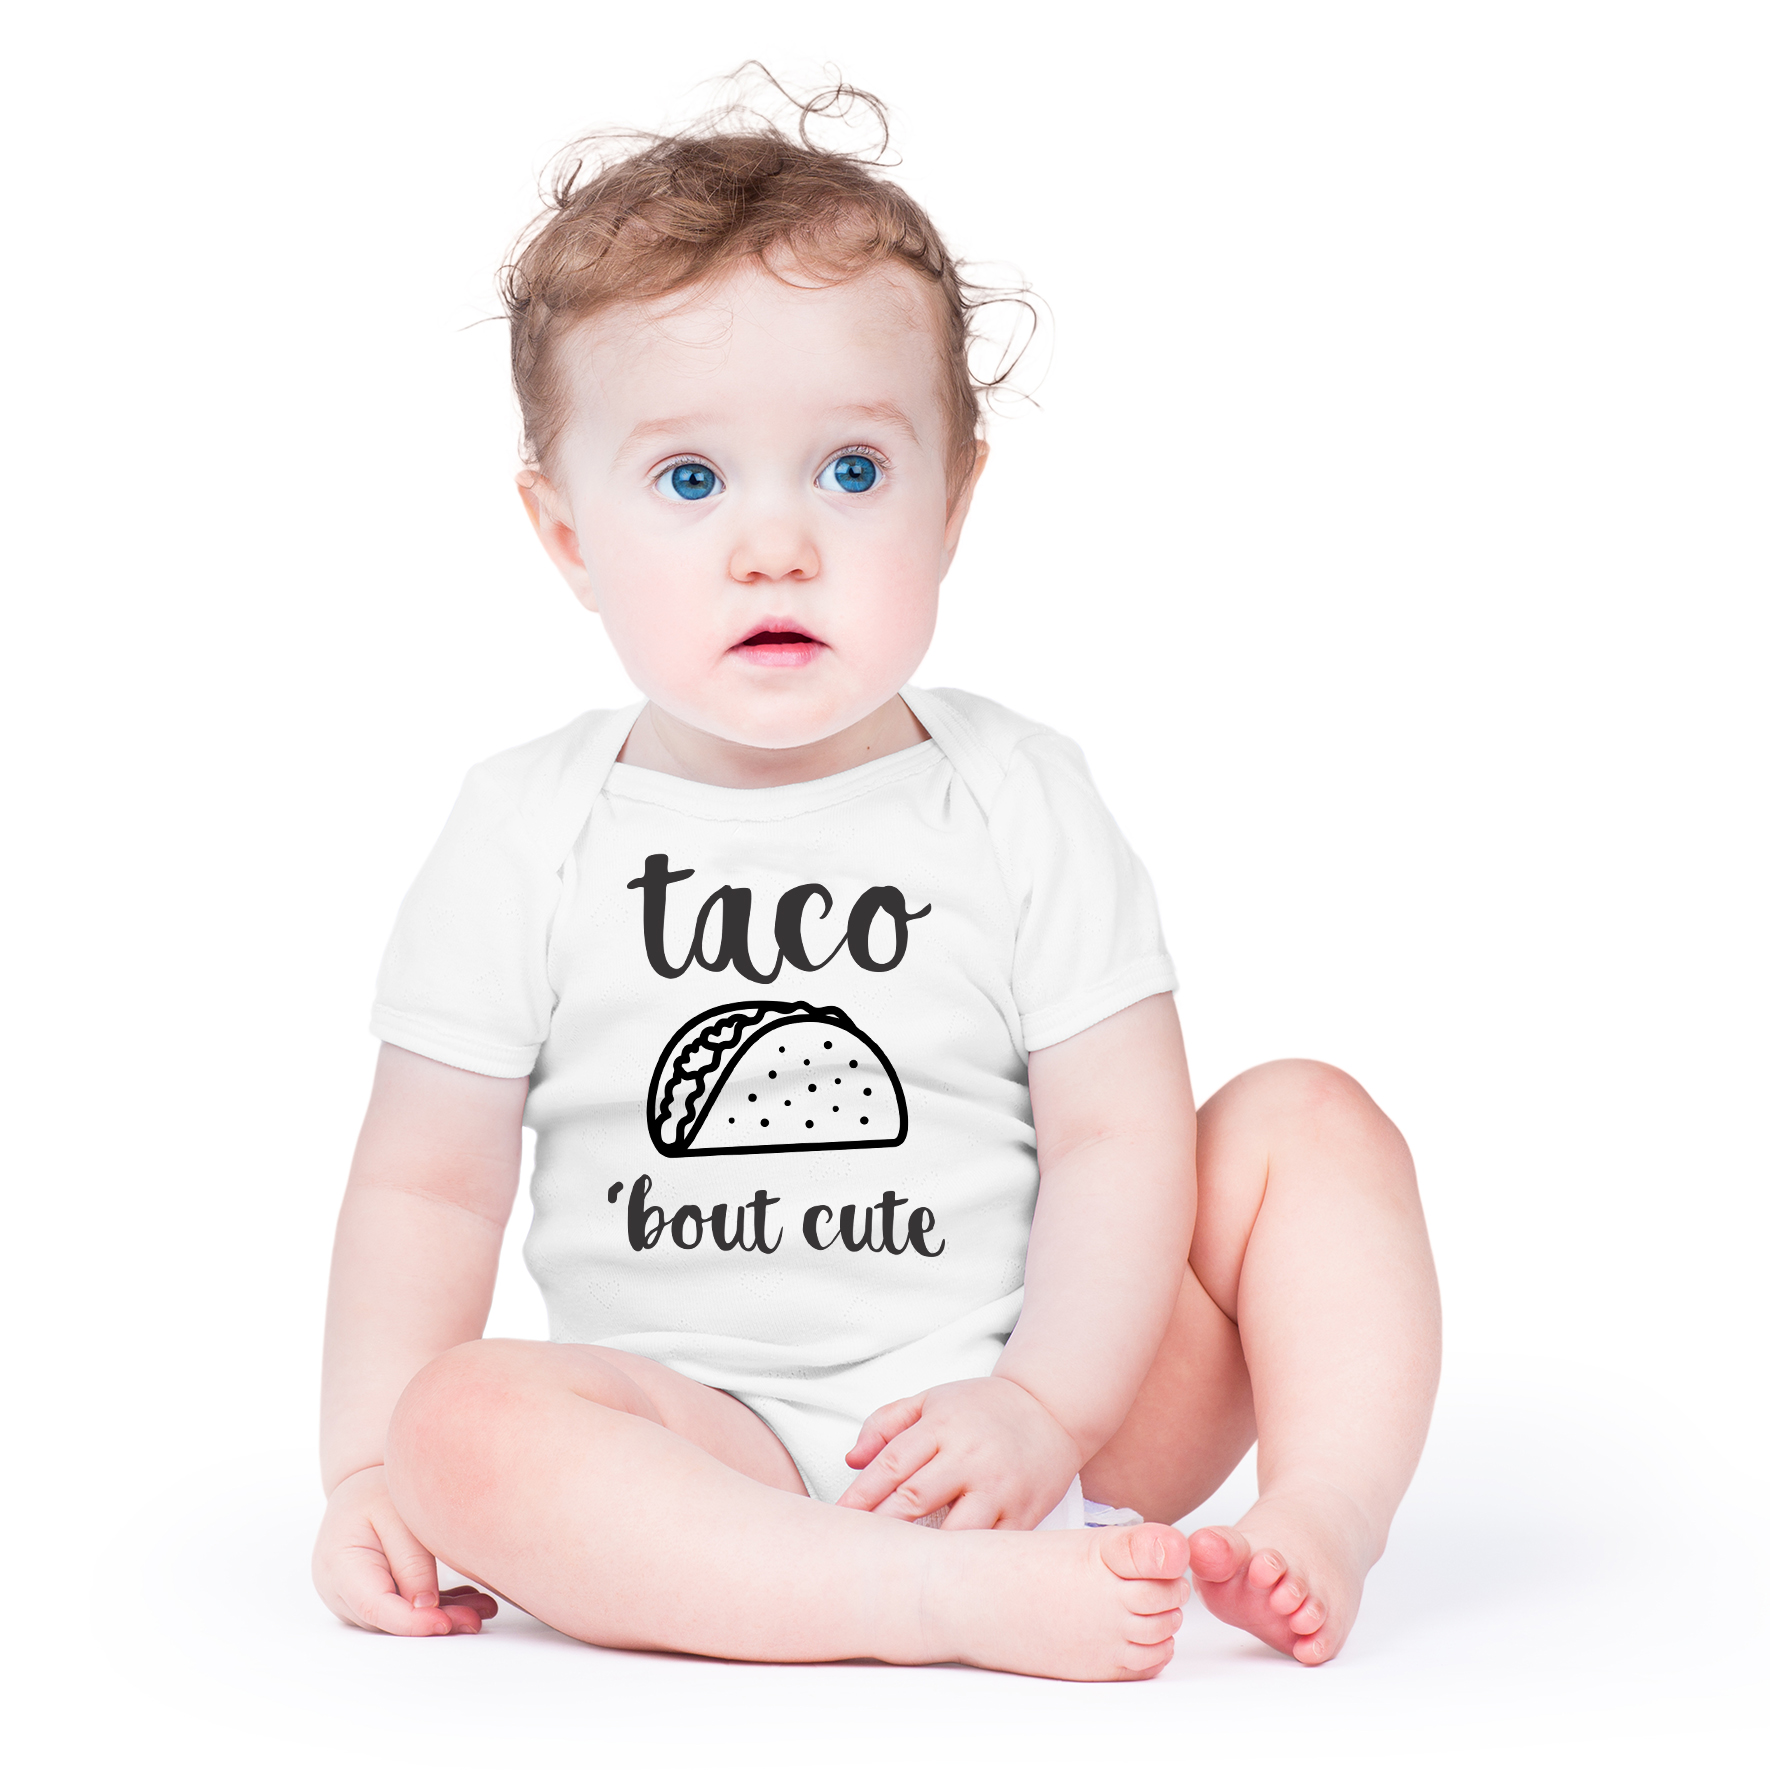 Taco 'Bout Cute - Funny Lil Adorable Tacos Mexican Food Lover - Cute One-Piece Infant Baby Bodysuit - image 2 of 4